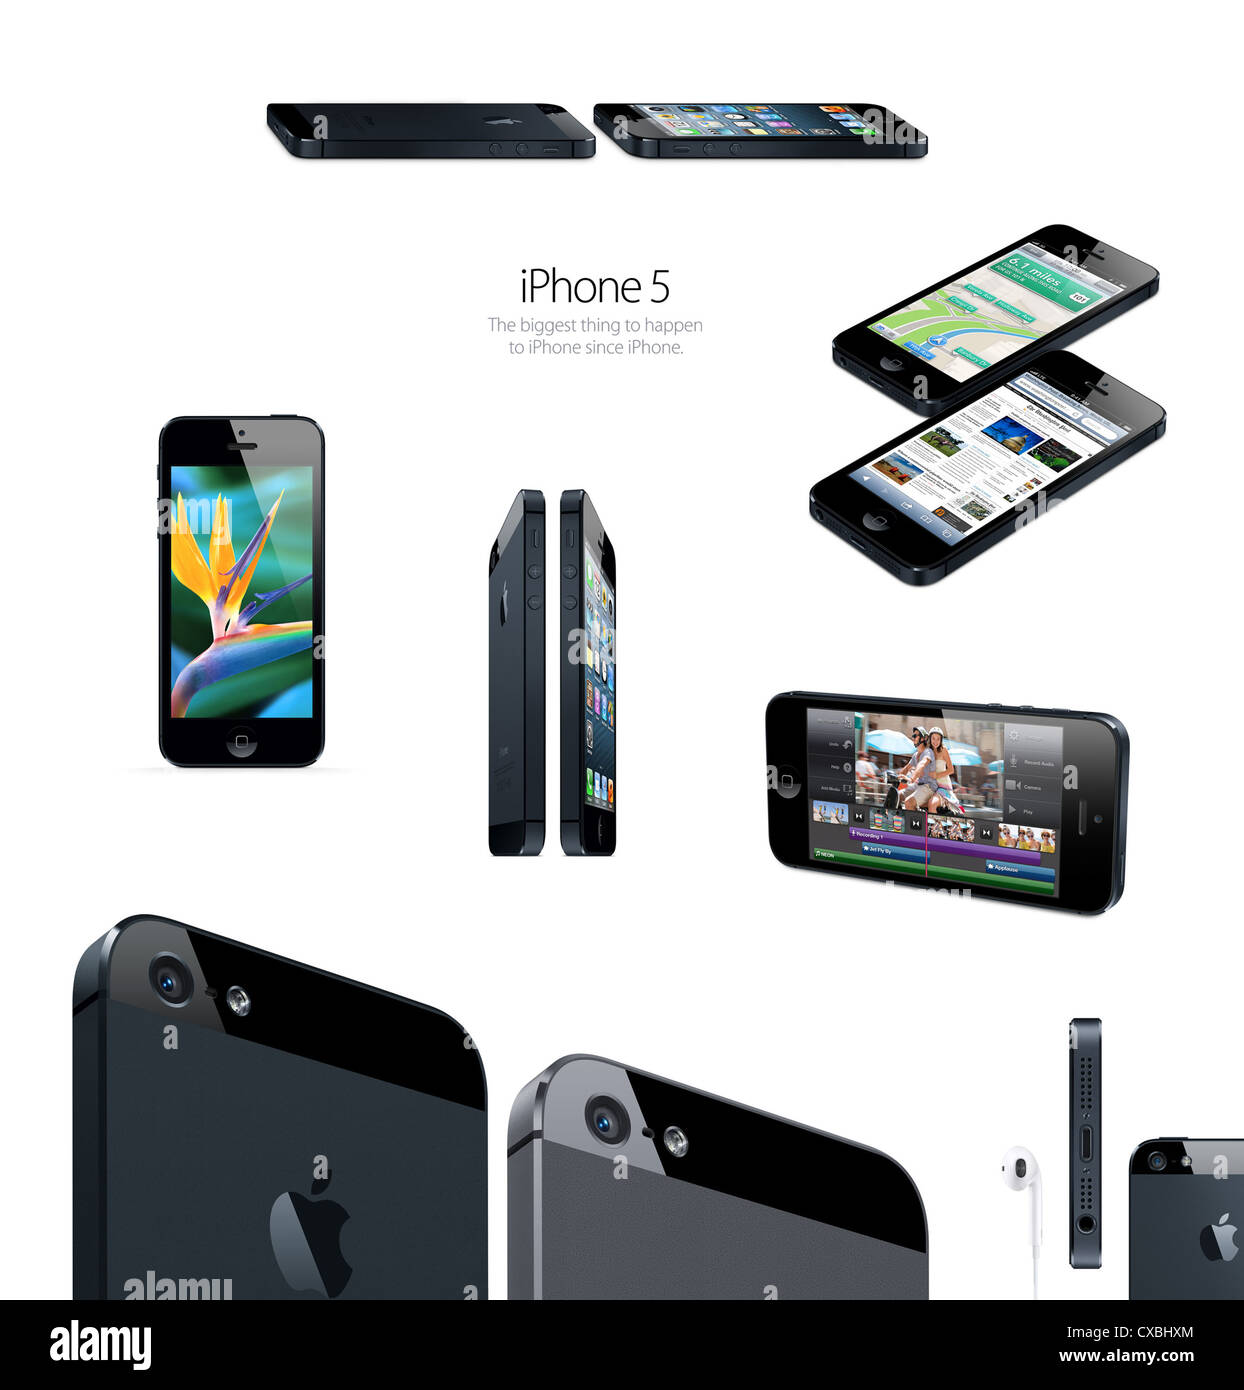 Images of Apple iPhone 5 mobile phone advertisement Stock Photo